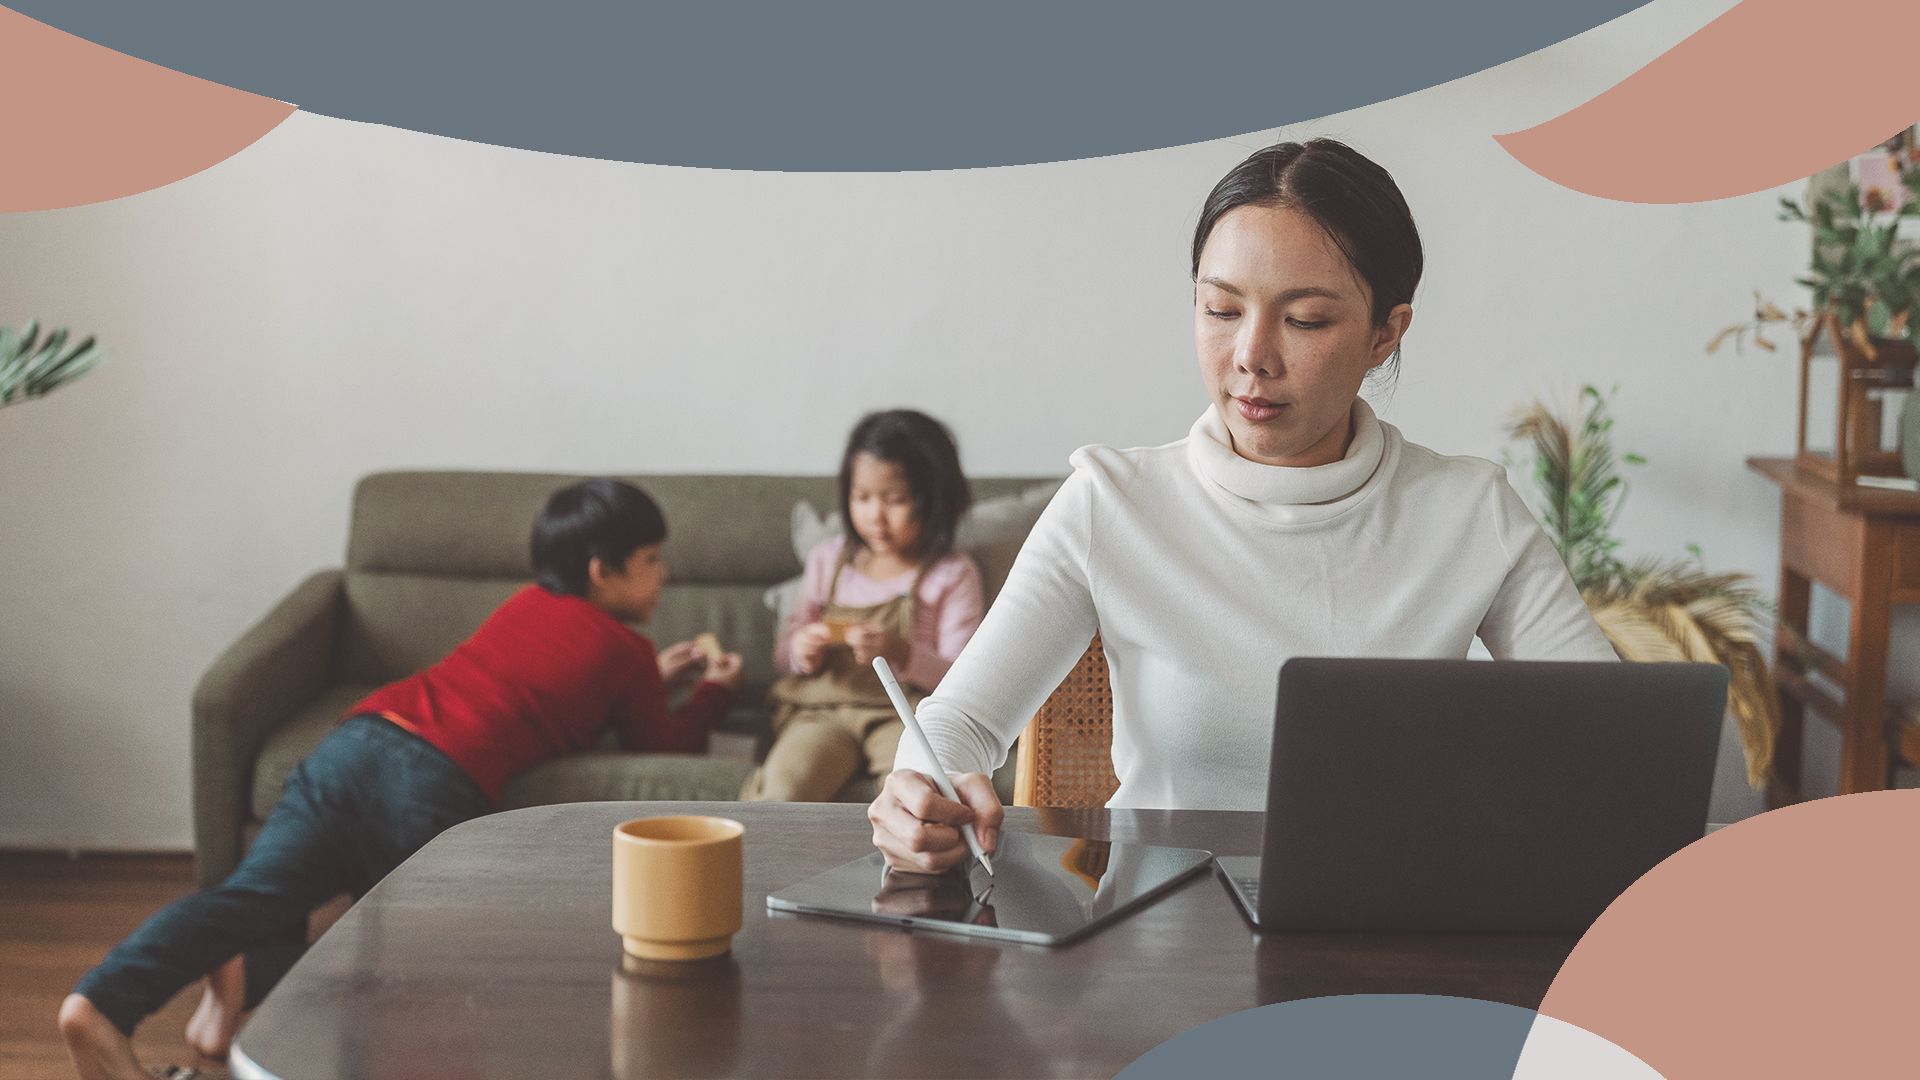 Top 5 Articles for Work-from-Home Parents